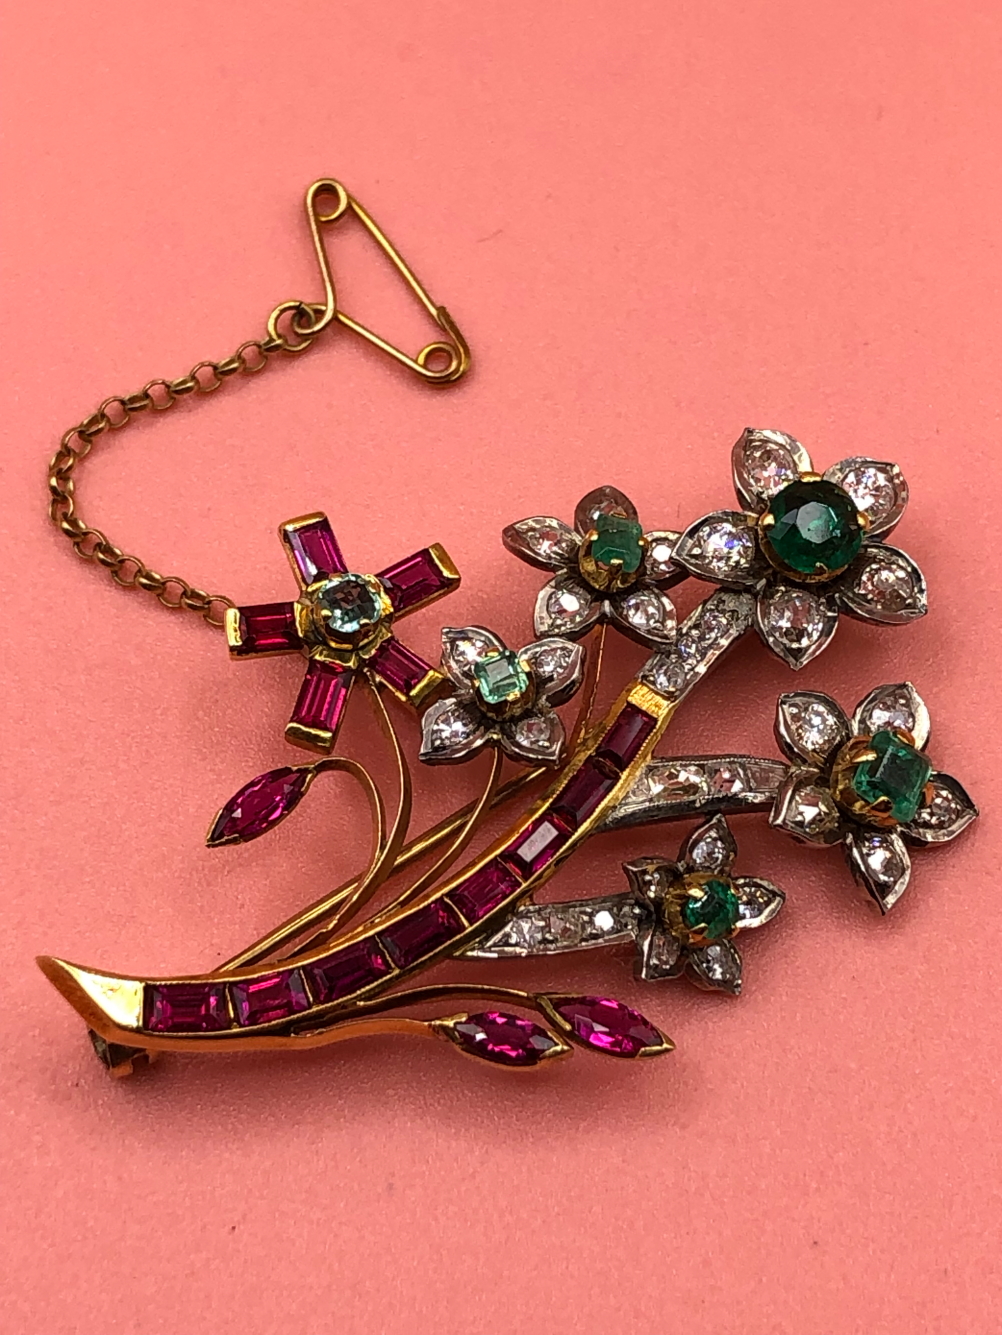 A 20th CENTURY DIAMOND, EMERALD AND RUBY SPRAY BROOCH. THE BROOCH UNHALLMARKED, ASSESSED VARIOUSLY - Image 3 of 6